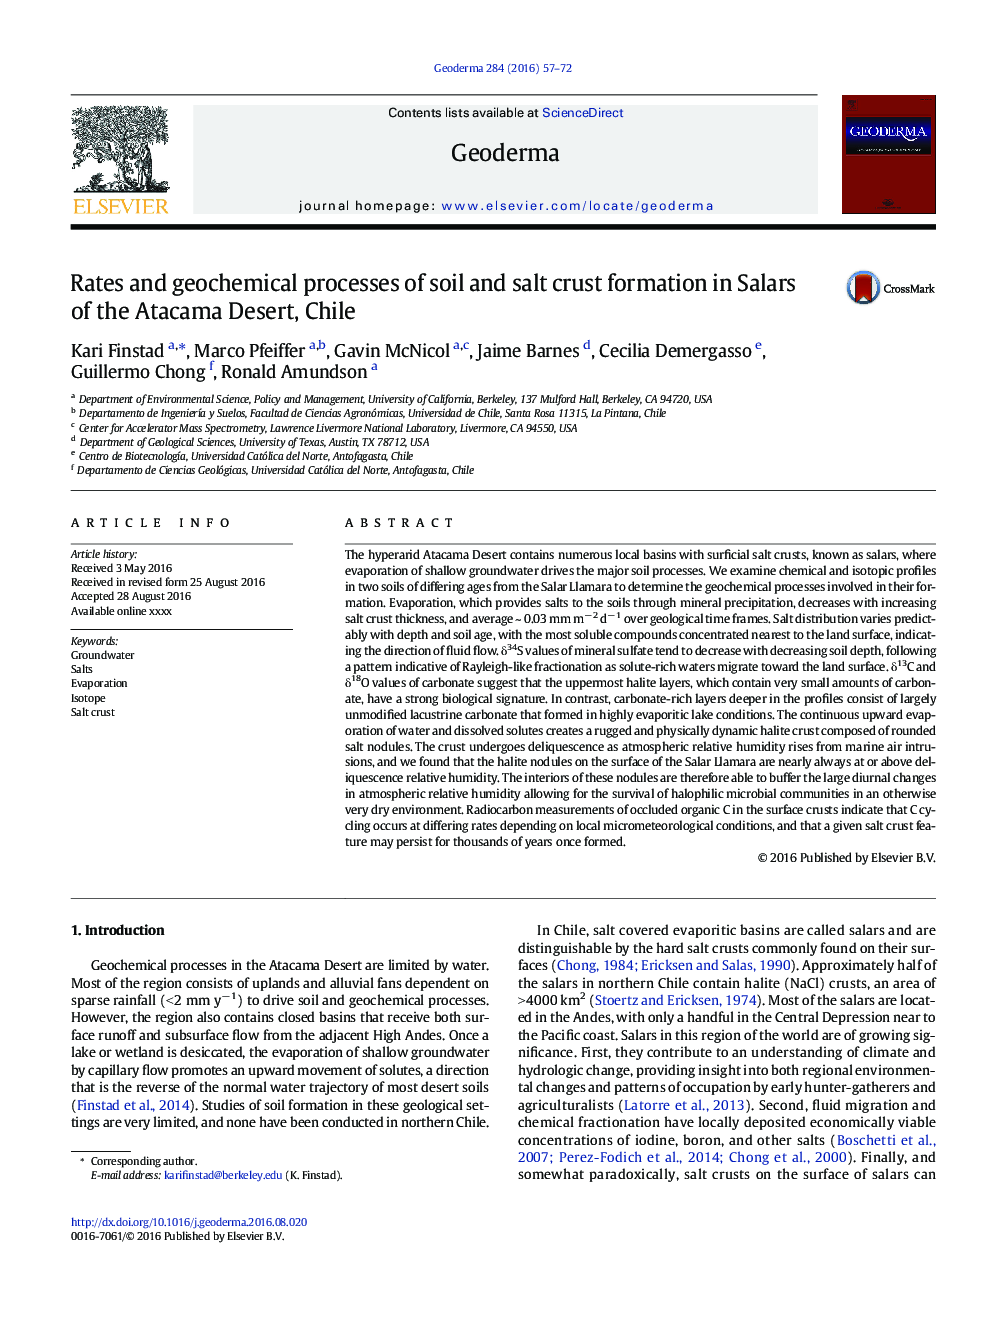 Rates and geochemical processes of soil and salt crust formation in Salars of the Atacama Desert, Chile